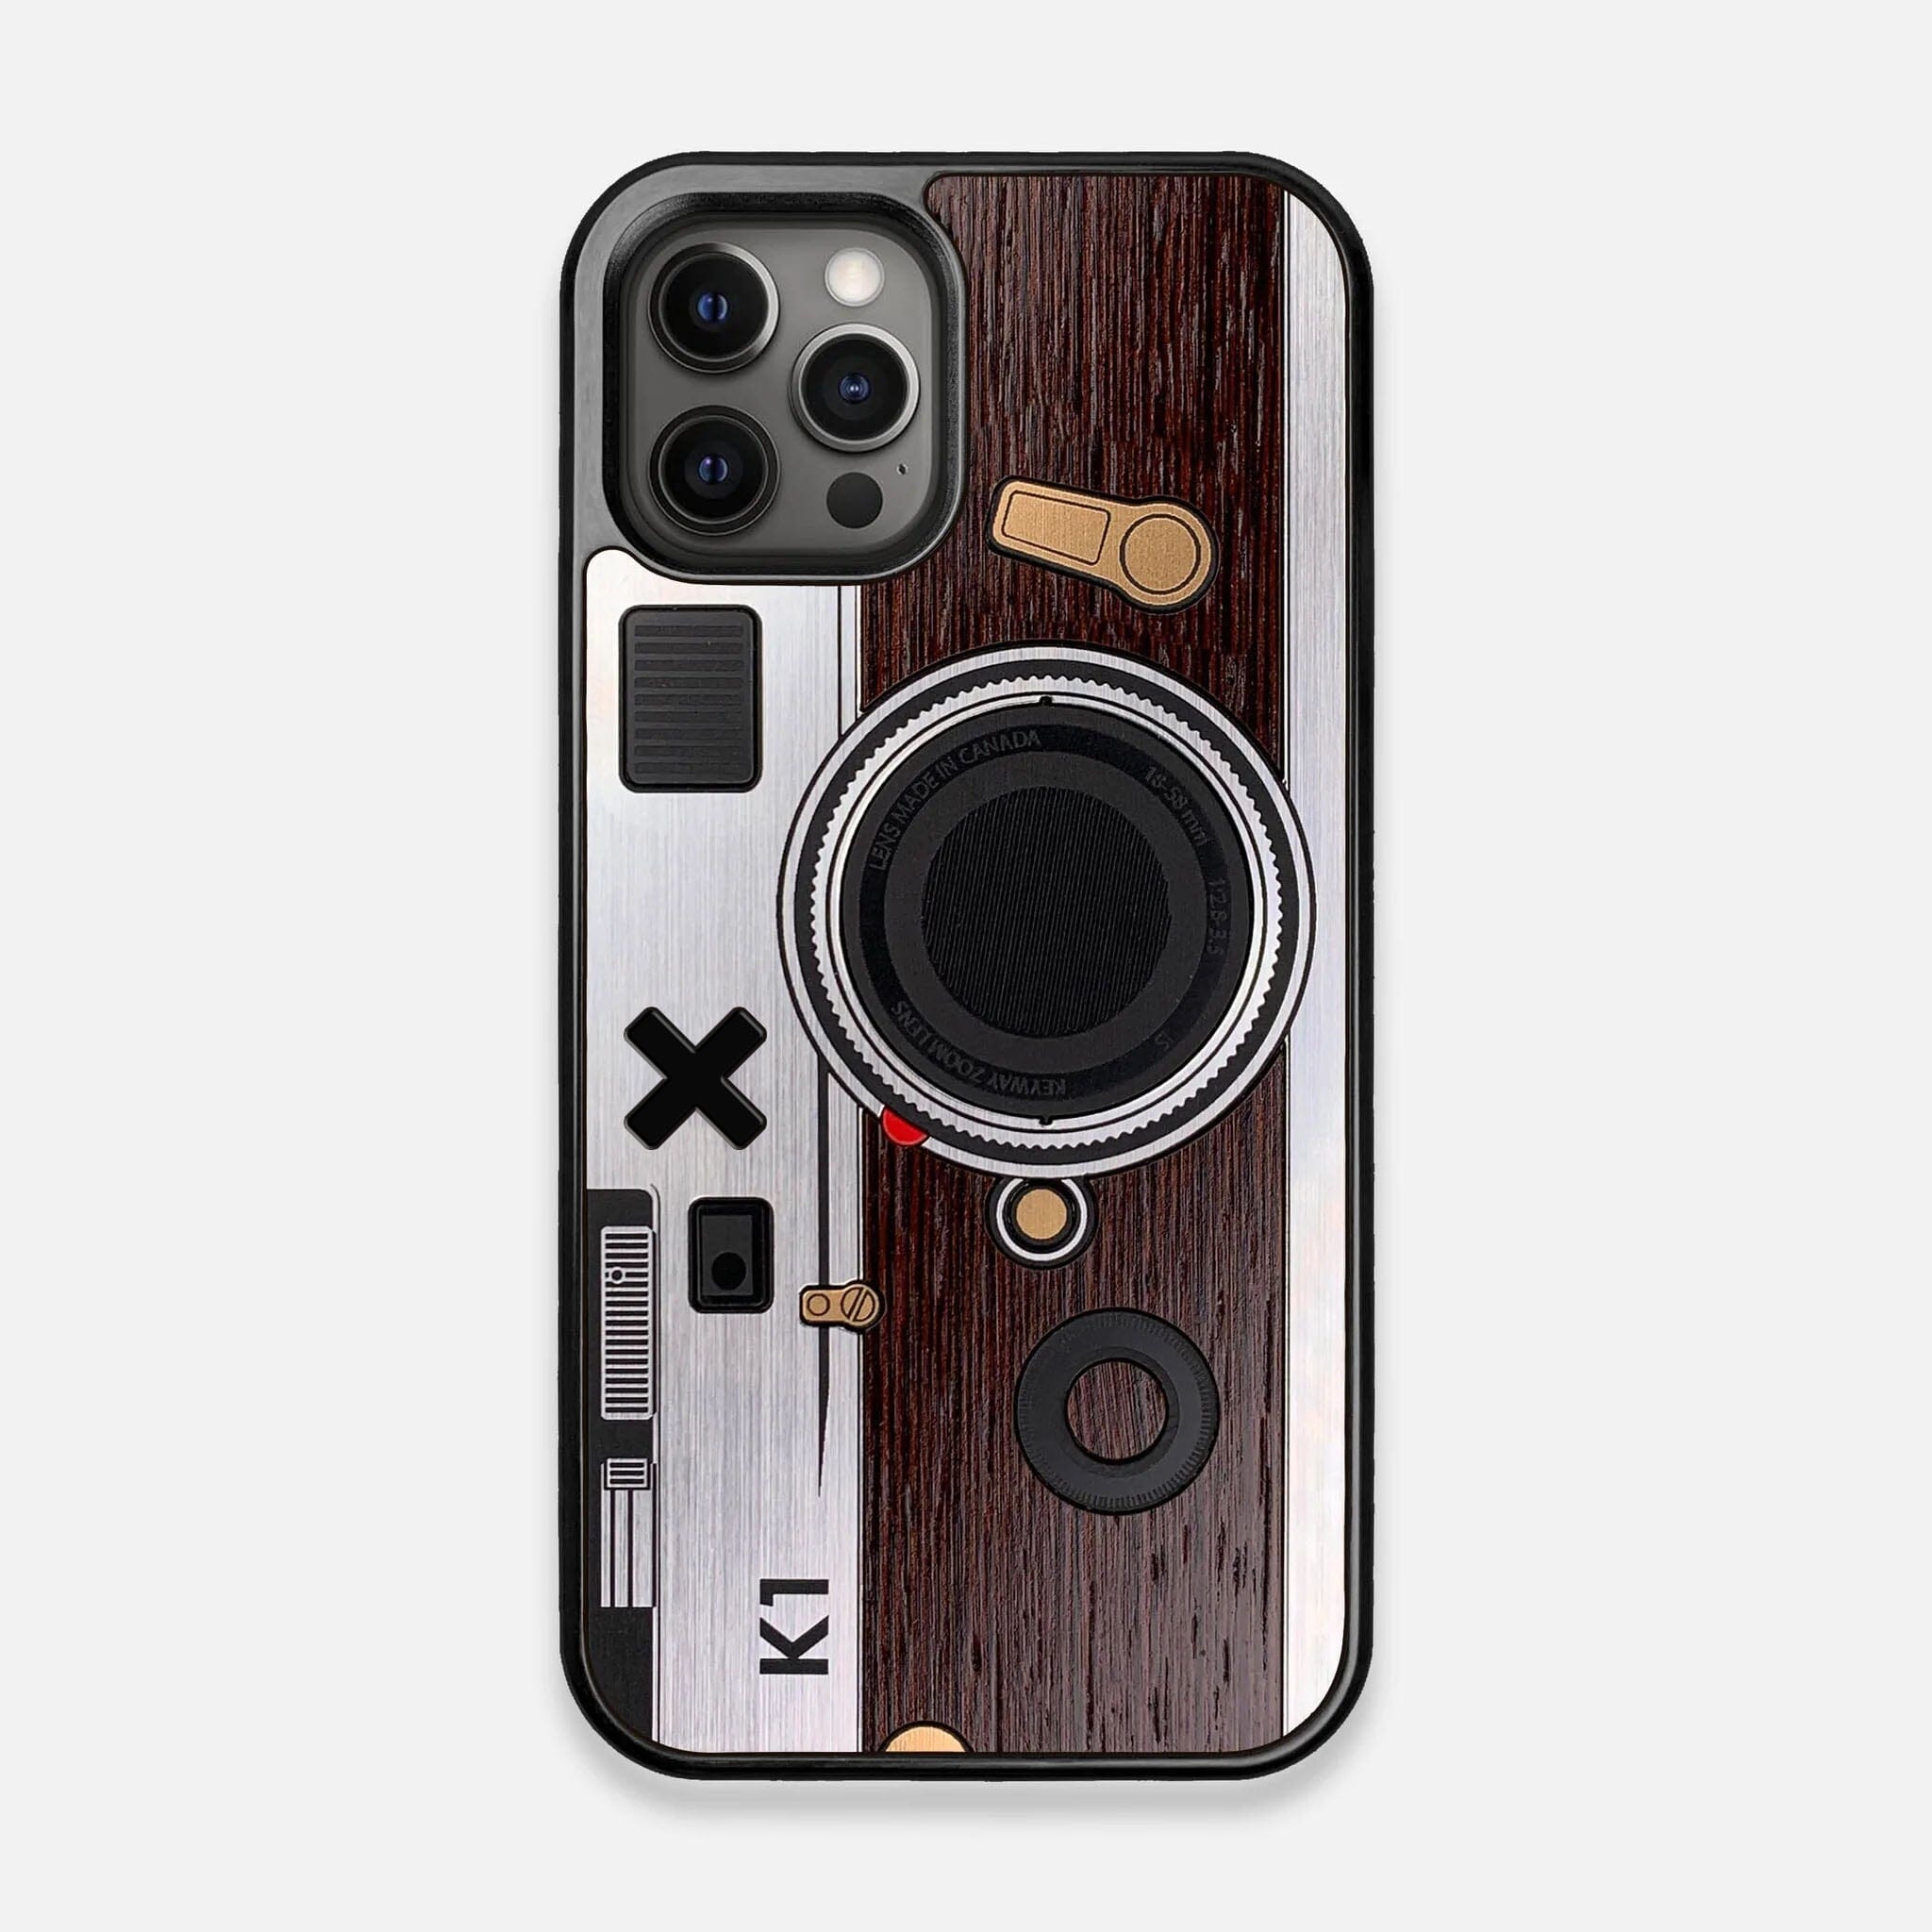 Front view of the Model K1 Camera iPhone 12 Pro Case by Keyway Designs